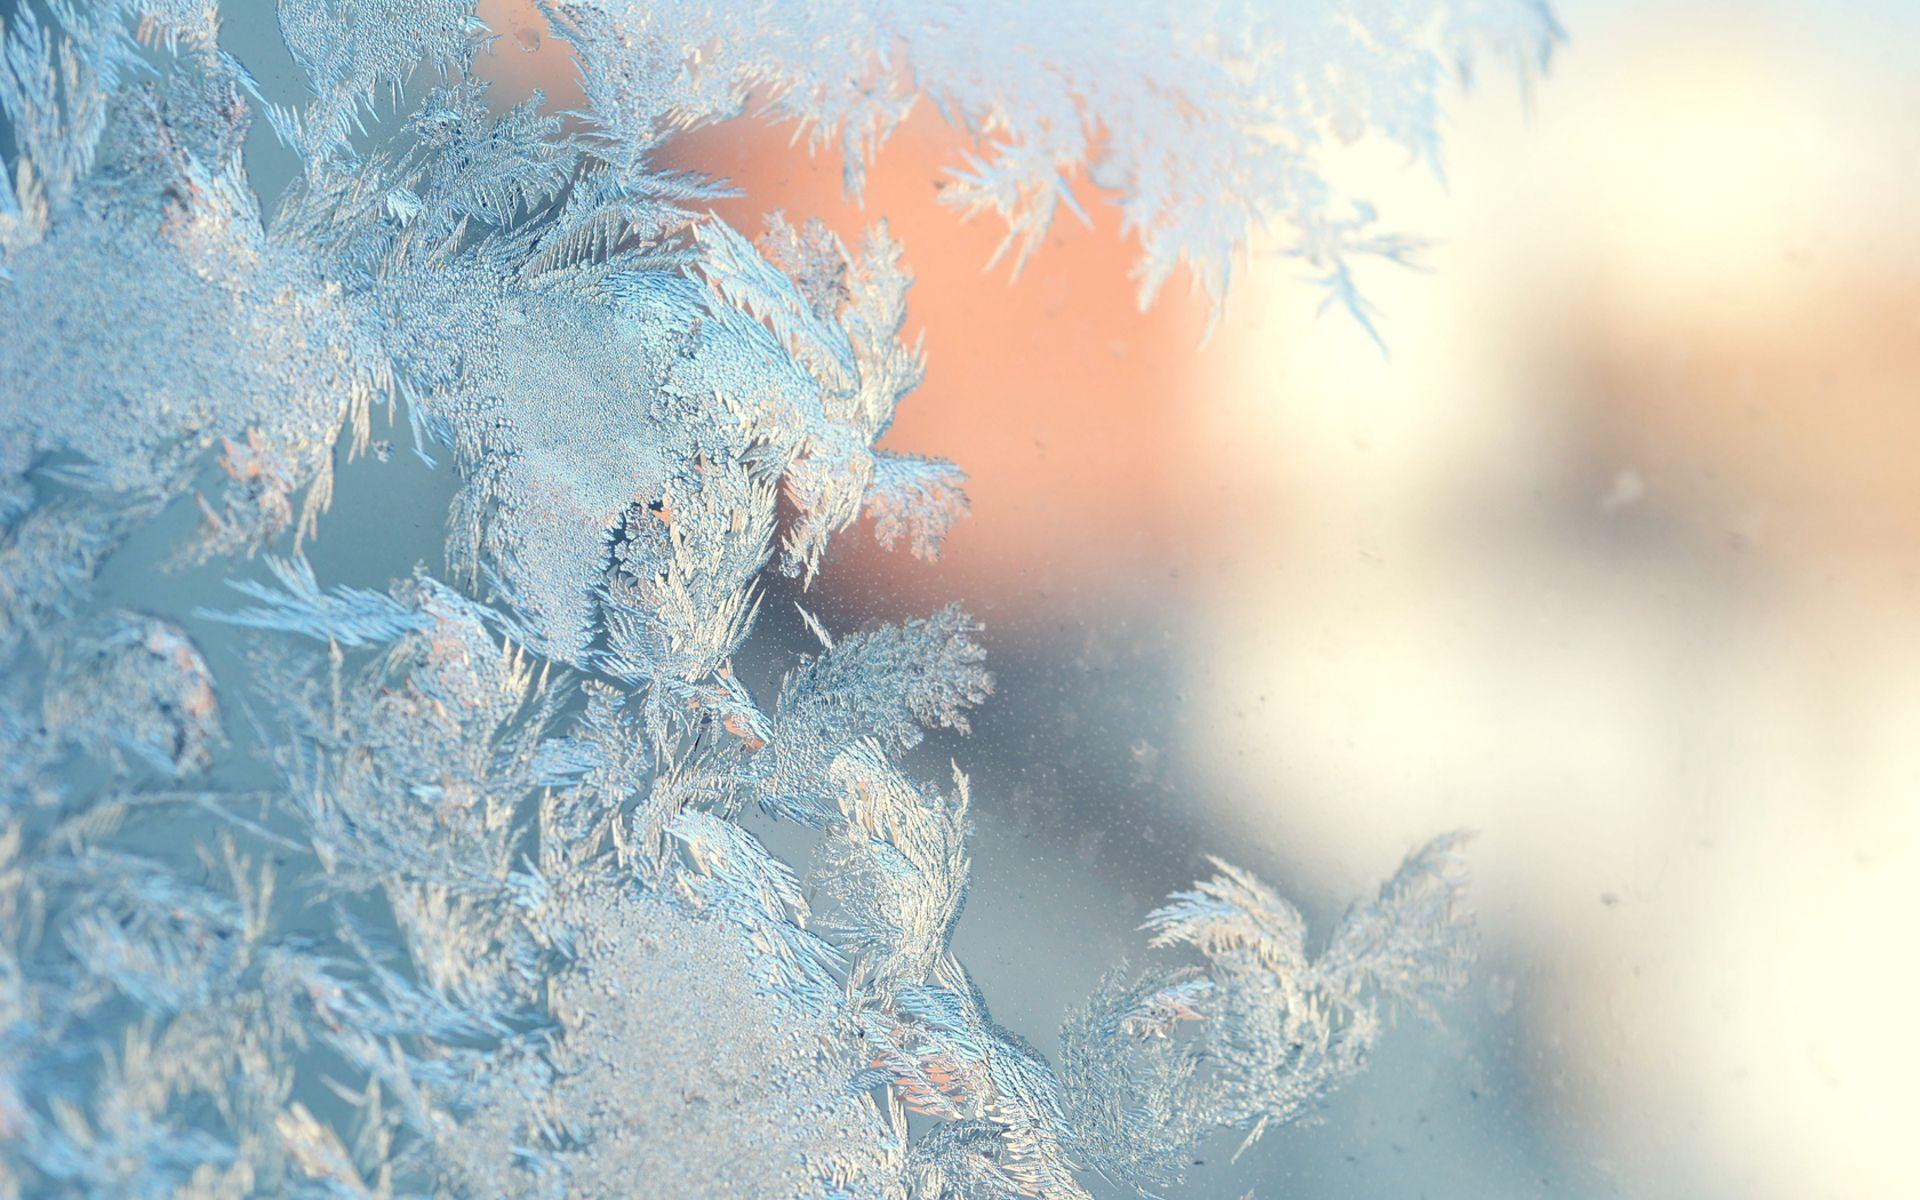 Indow Frost HD Wallpaper, Background Image